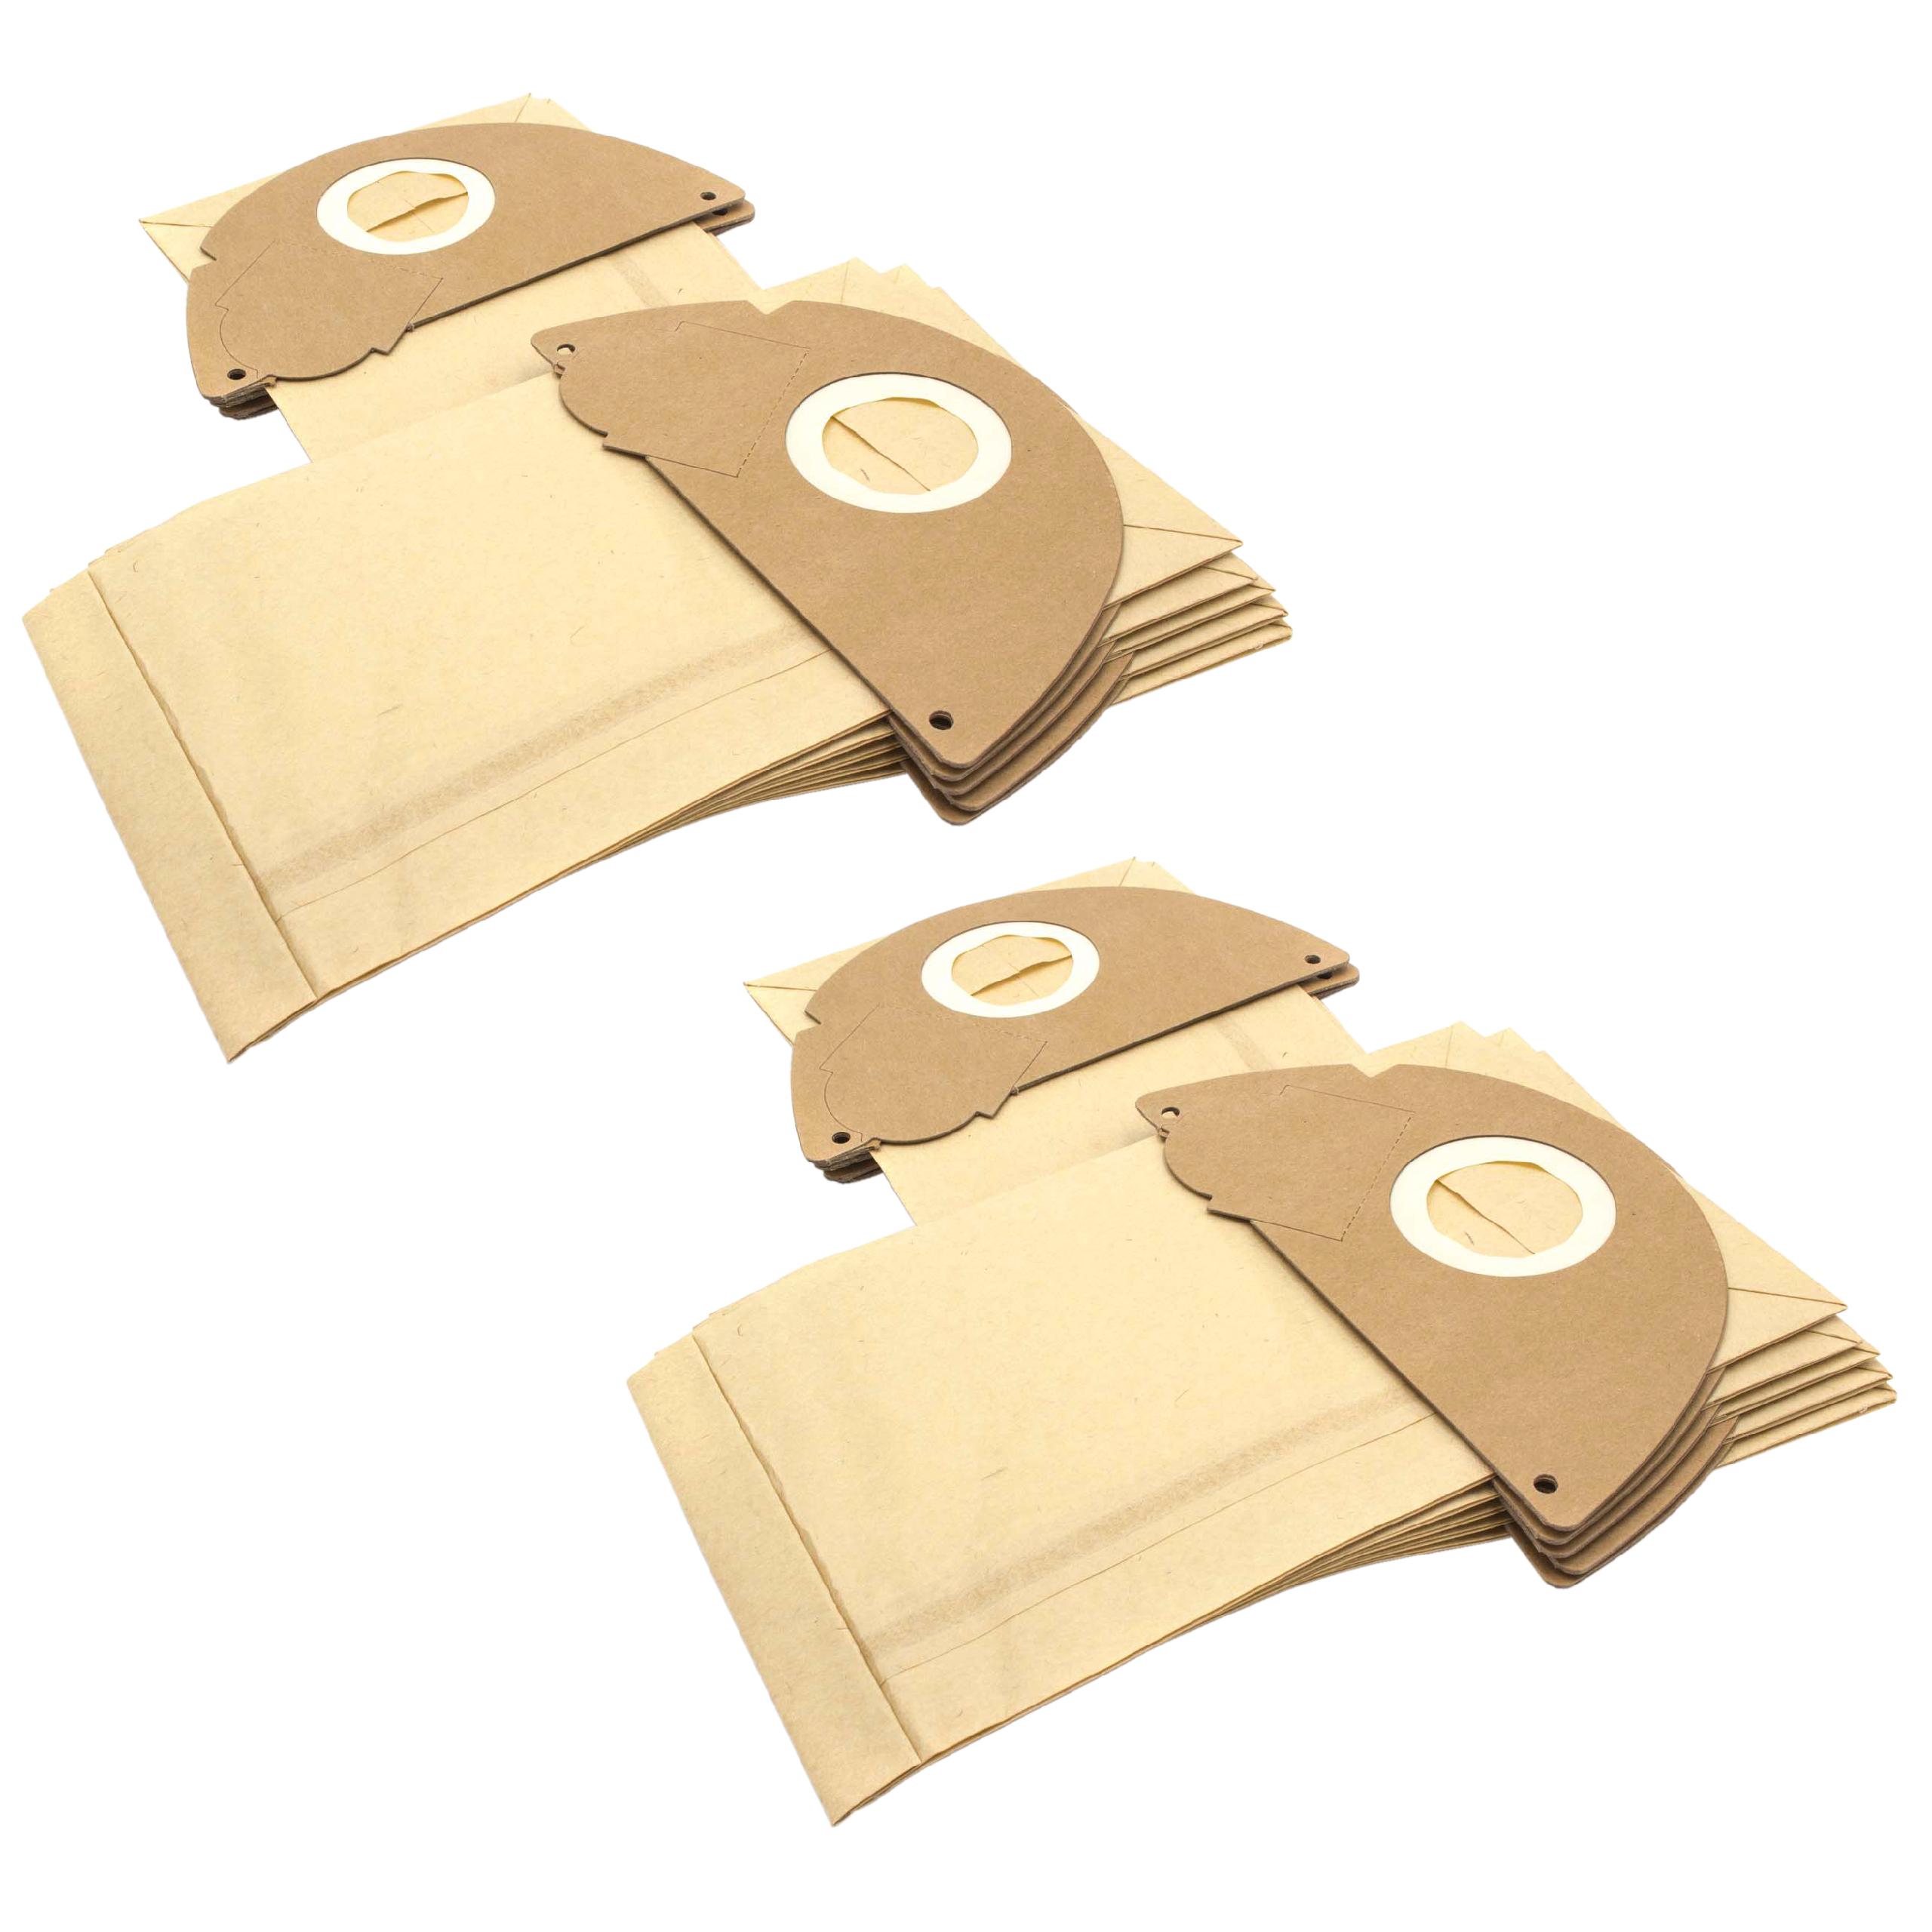 20x Vacuum Cleaner Bag replaces Kärcher 6.904-167, 6.904-164 for Hoover - paper